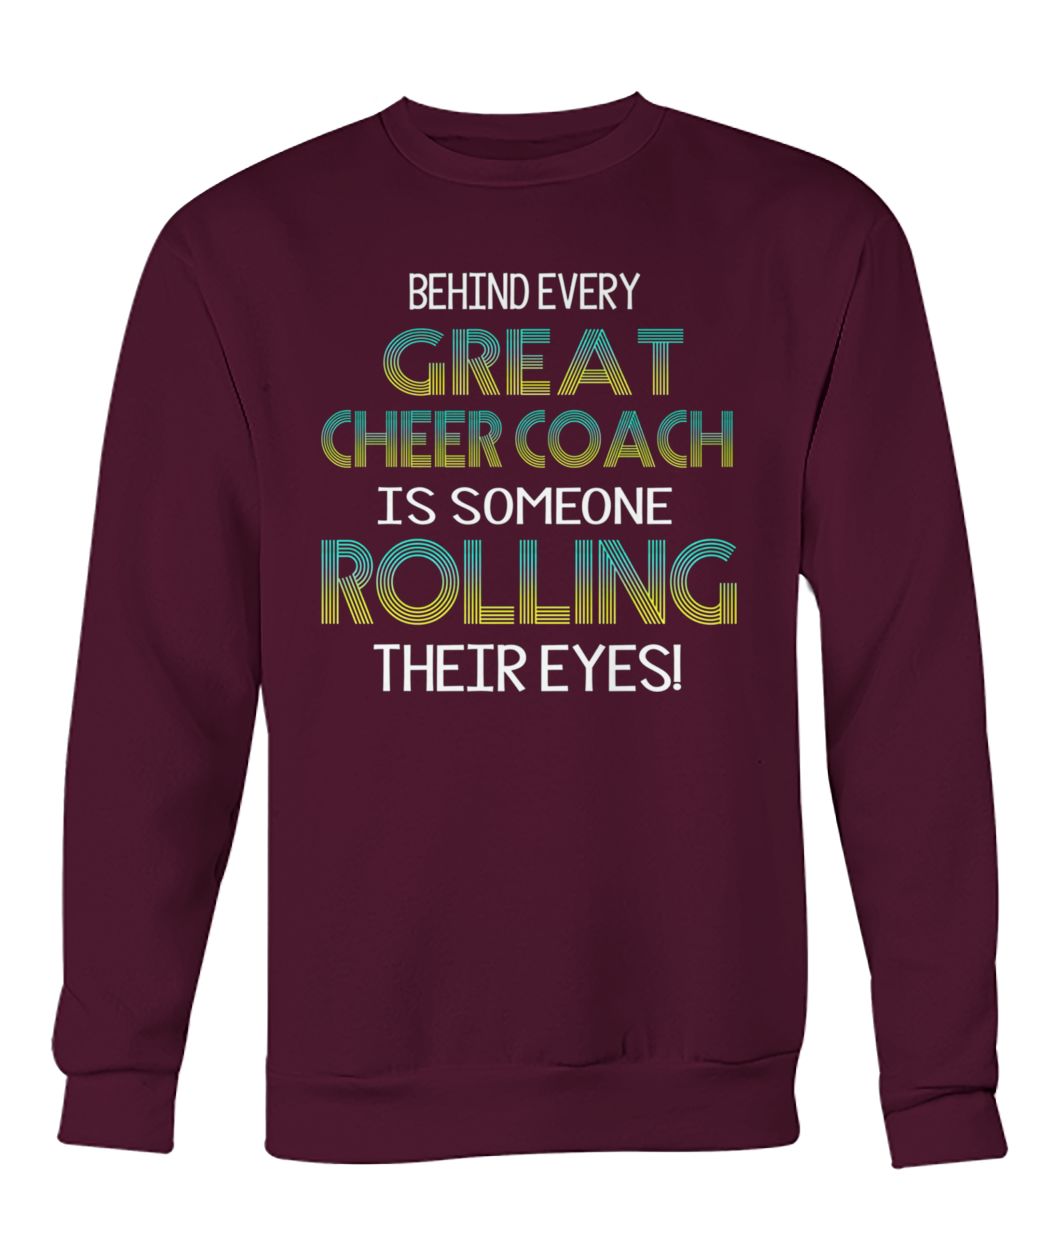 Behind every great cheer coach is someone rolling their eyes crew neck sweatshirt